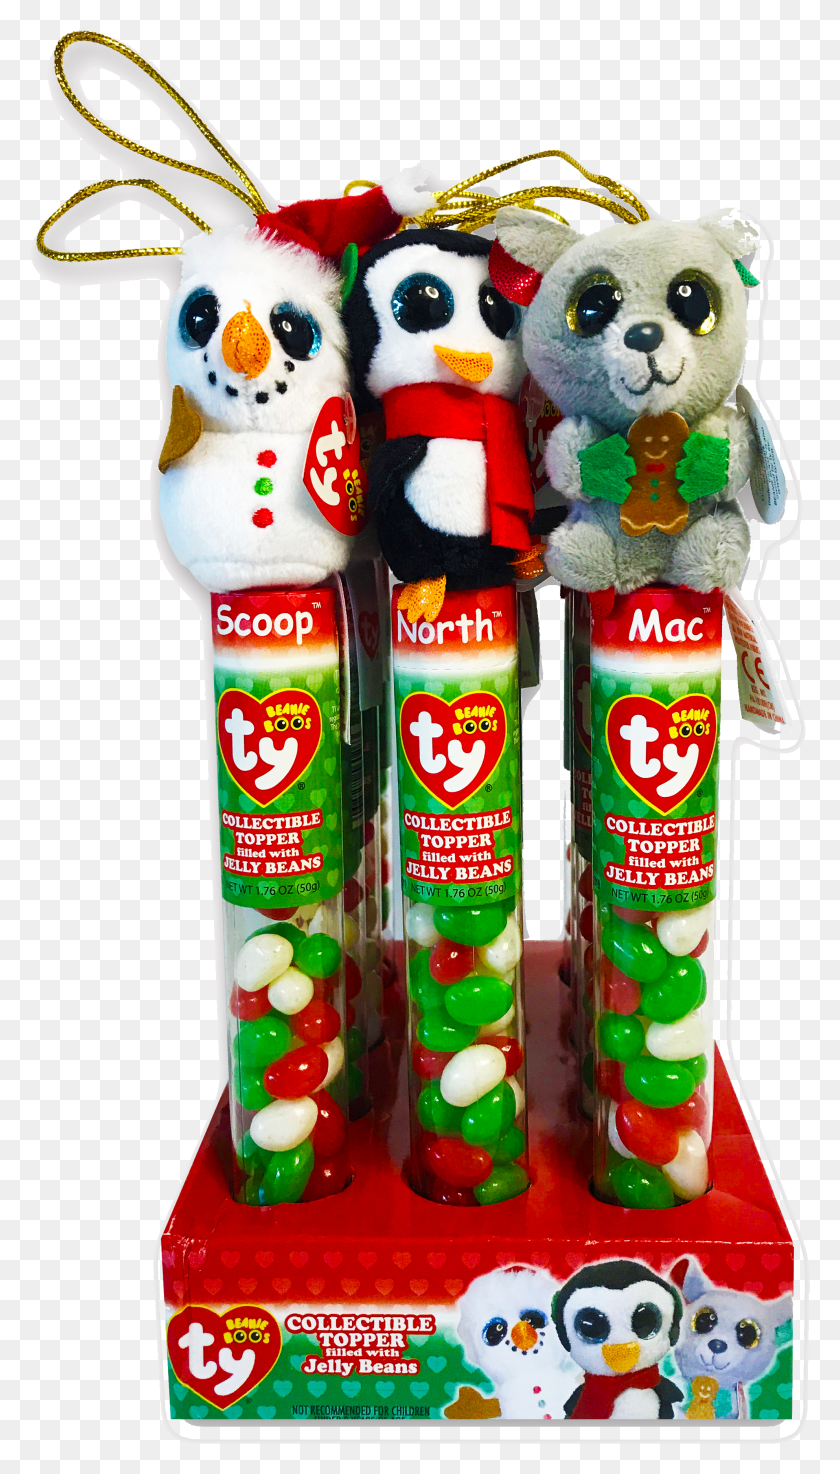 1984x3597 Beanie Boo39S Holiday Tube Topper Plush With Candy Beanie Boo Con Jelly Beans Hd Png